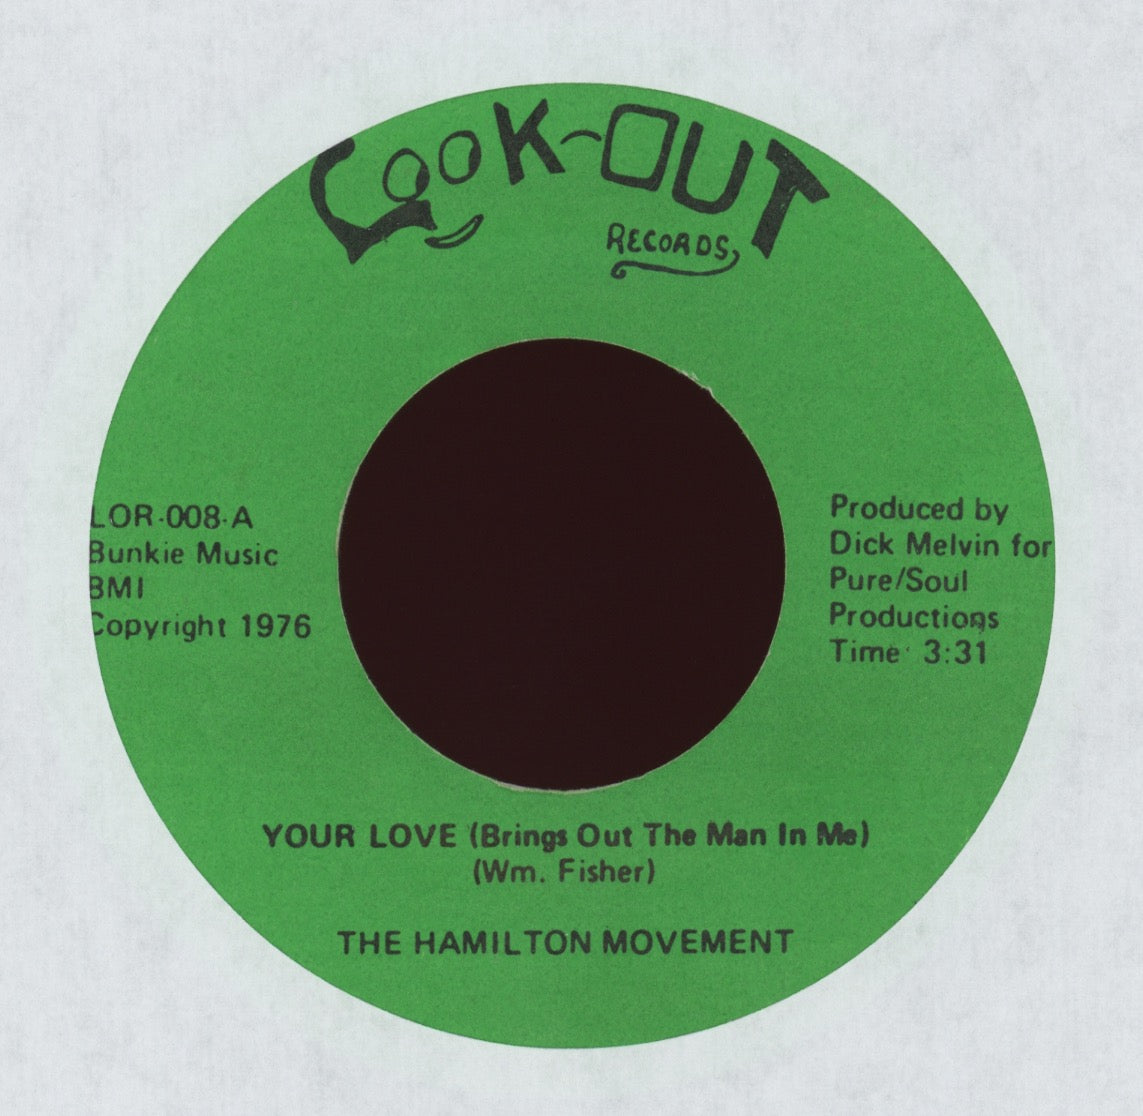 The Hamilton Movement – Your Love (Brings Out The Man In Me) on Look-Out